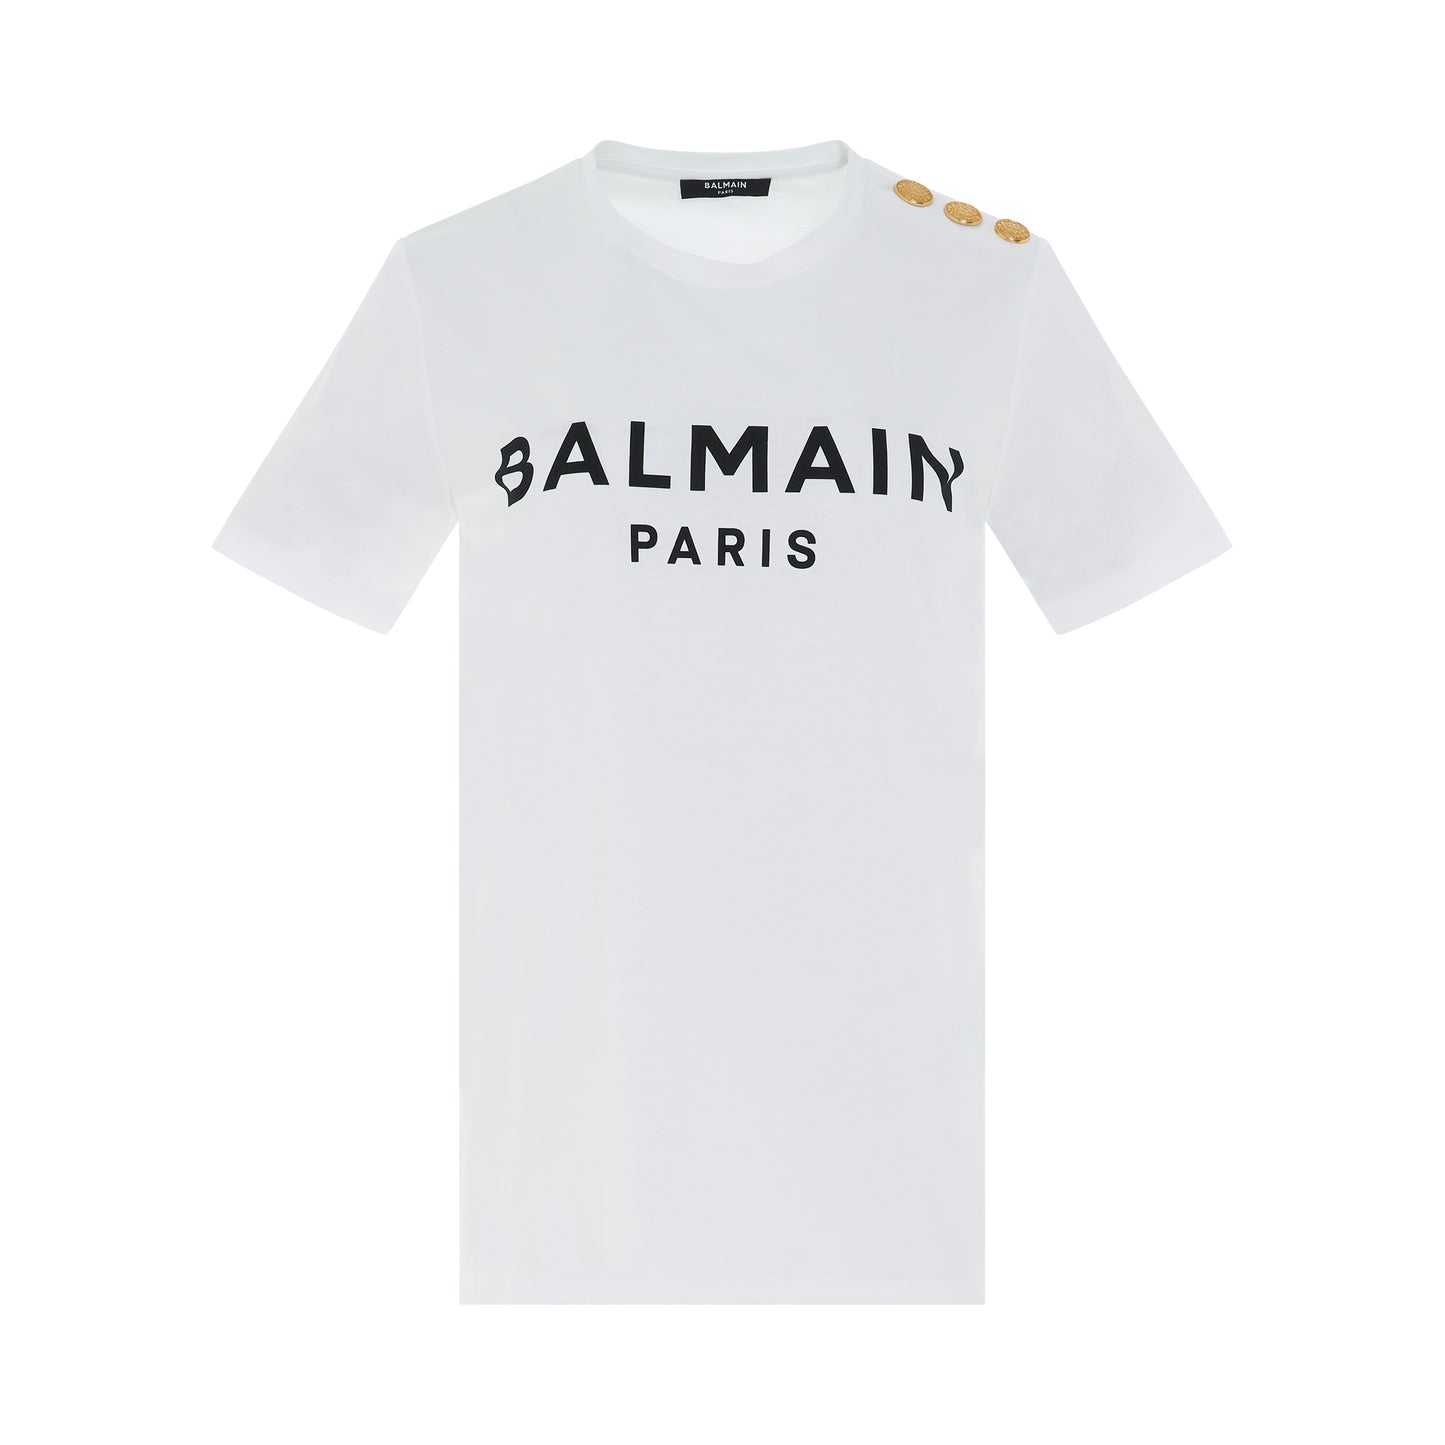 3 Button Printed Logo Classic Fit T-Shirt in White/Black